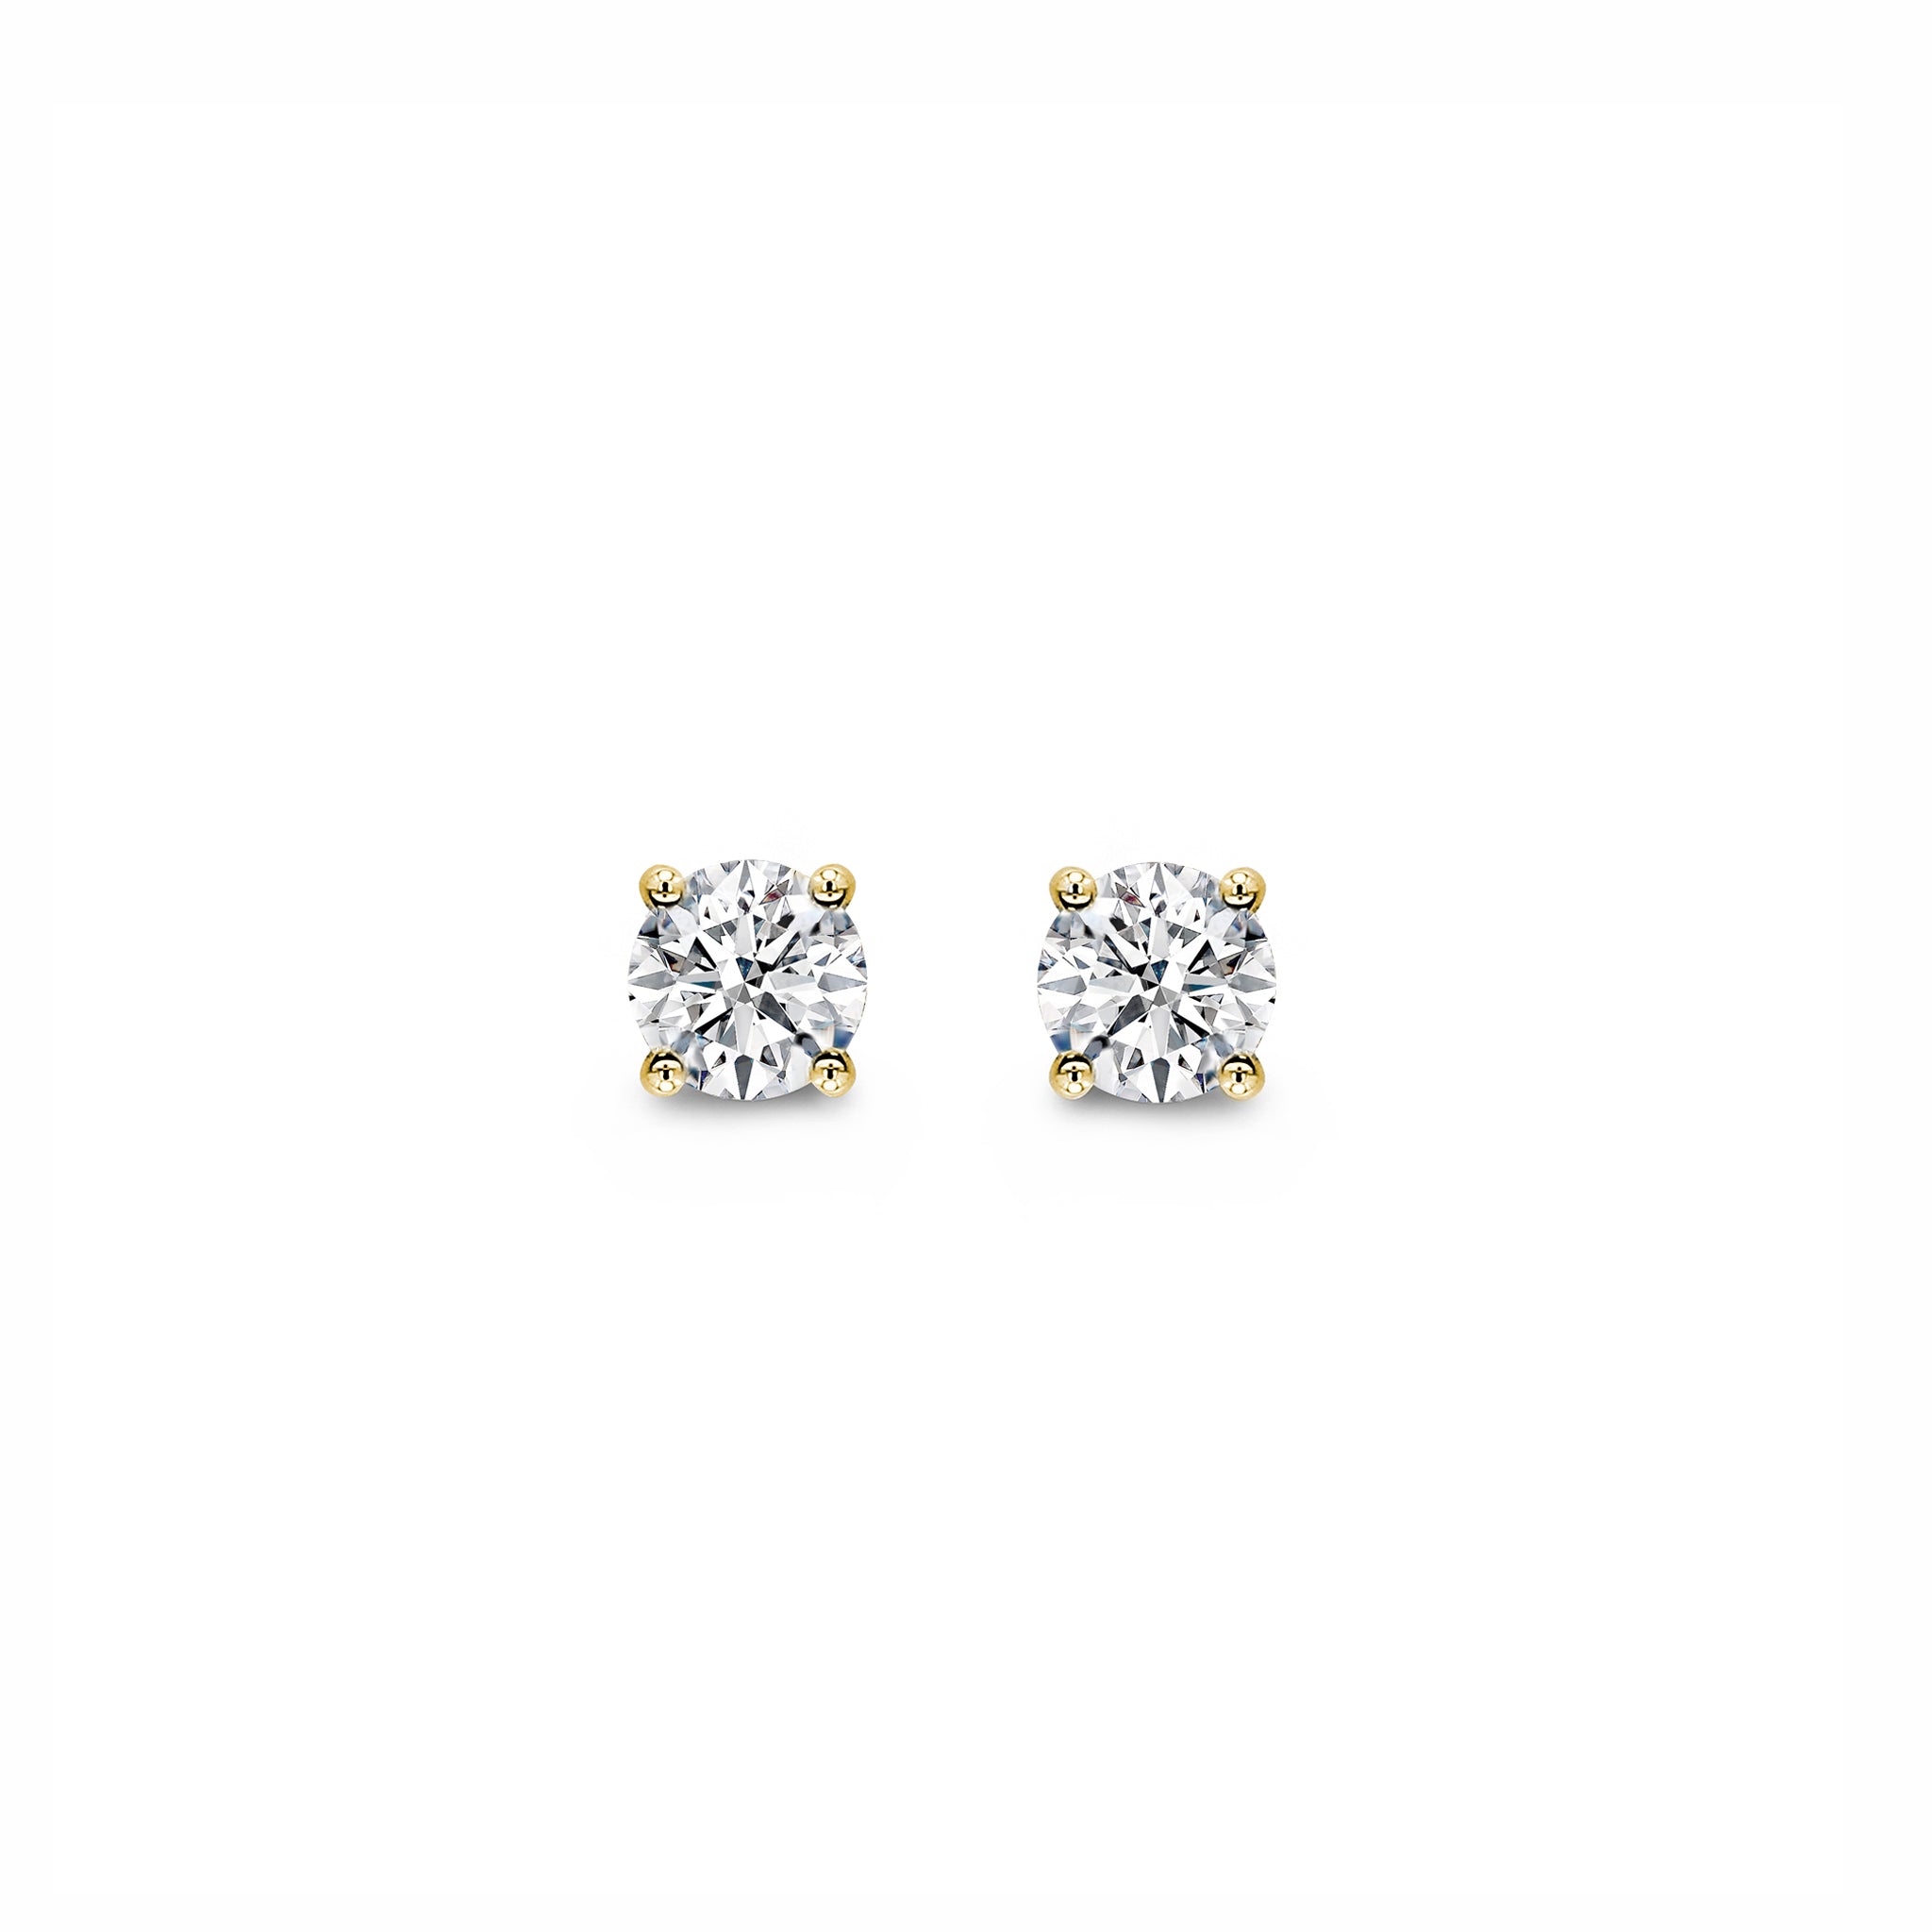 Shimansky - Classic Diamond Solitaire Earrings 1.00ct in 18K Yellow Gold